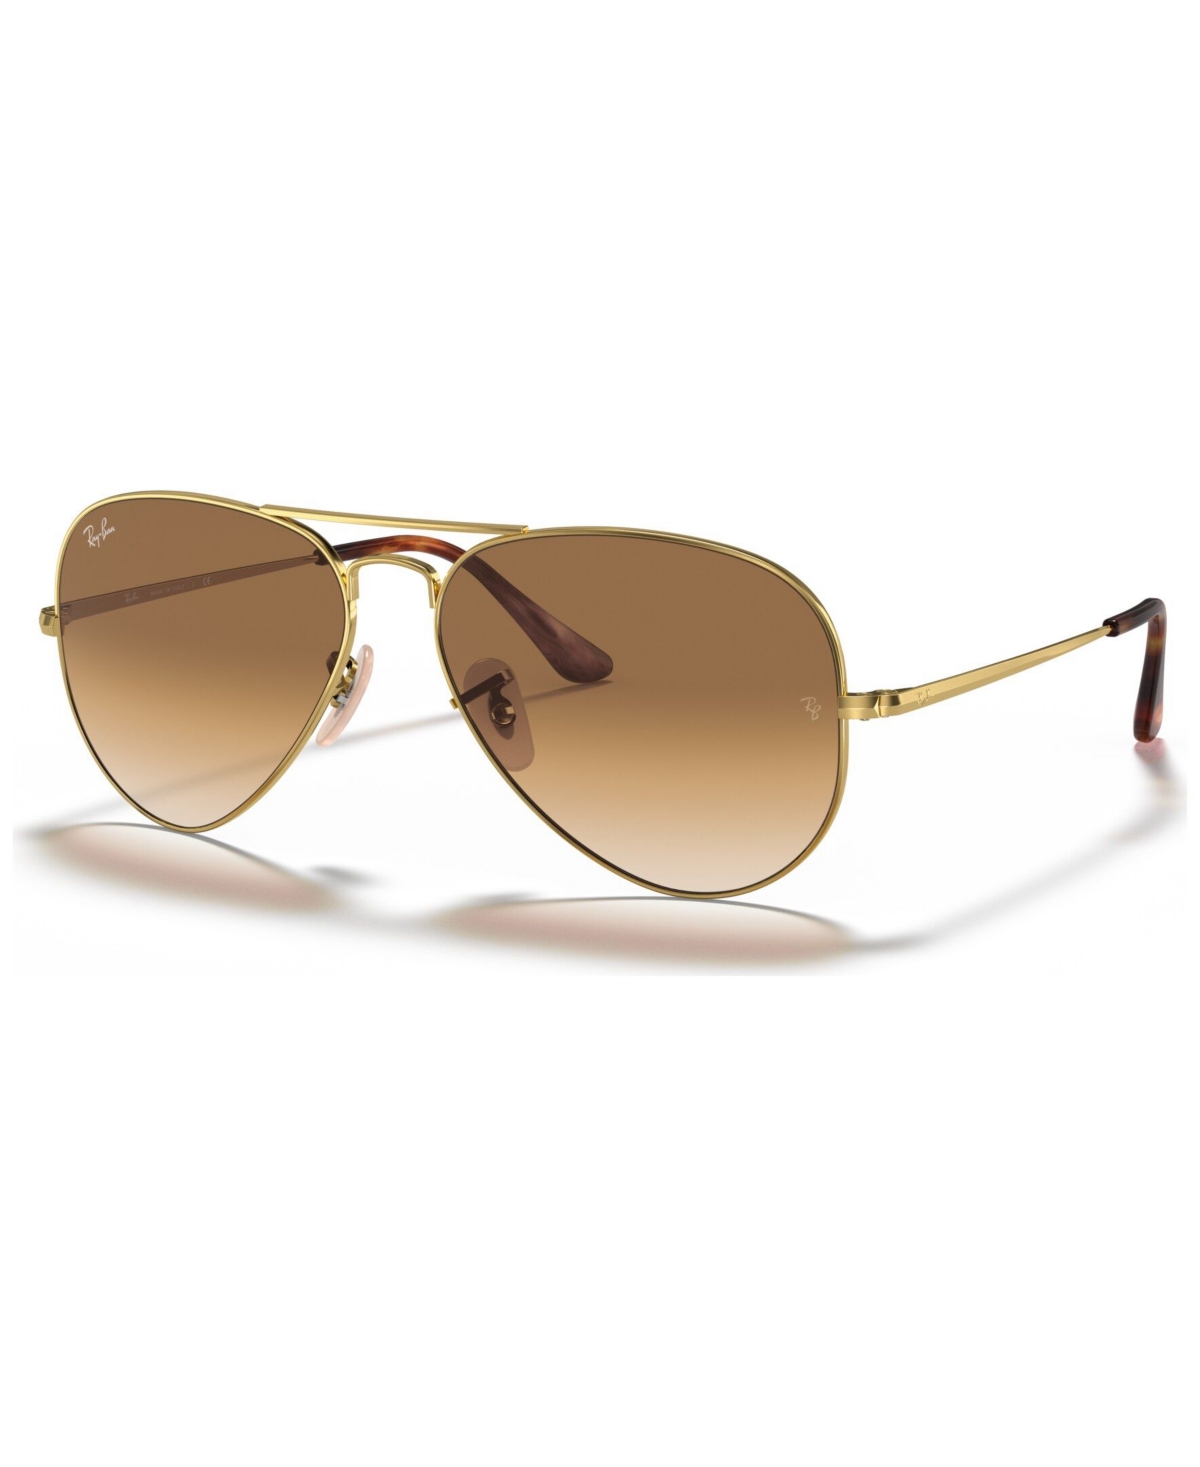 Ray Ban Aviator Metal Ii Sunglasses, Rb3689 Gradient In Gold,clear Gradient Brown